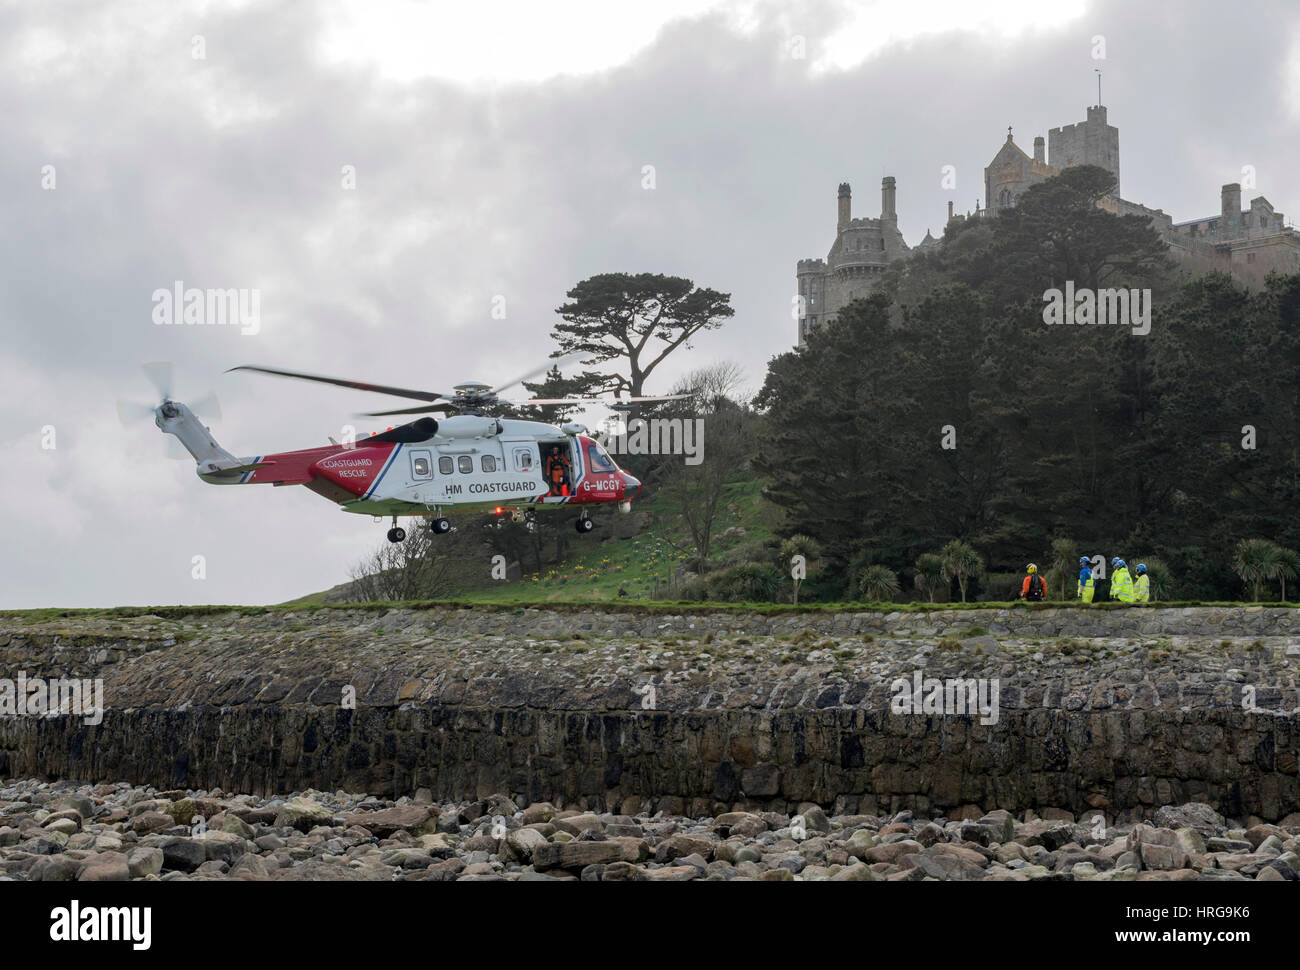 St Michaels Mount, Cornwall, UK. 1st March 2017. Newquay based coastguard Helicopter on approach to land, coastguard and one of the aircrew observe from the ground at St Michaels Mount, Cornwall,UK Credit: Bob Sharples/Alamy Live News Stock Photo